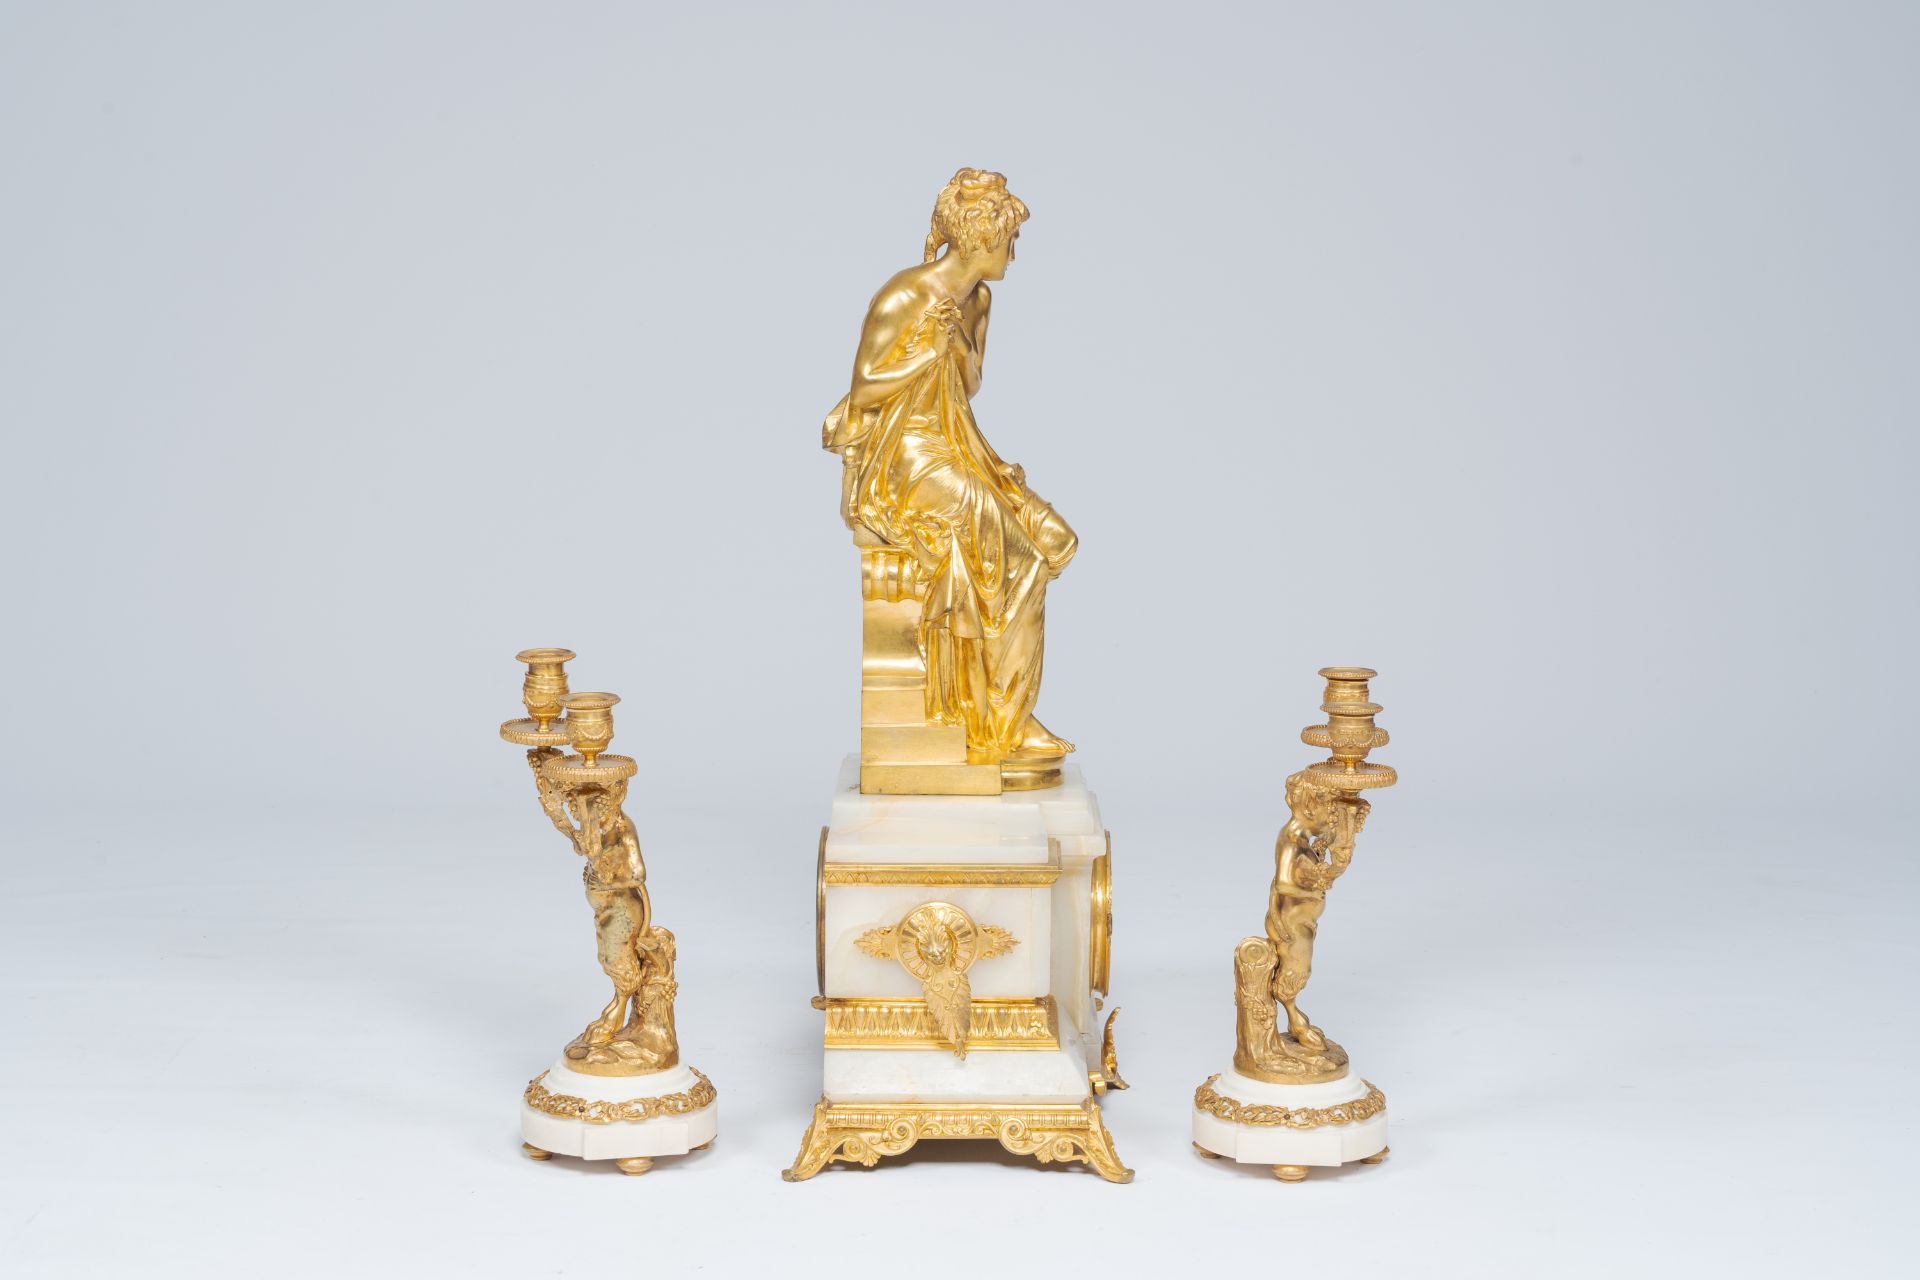 A French gilt bronze mounted marble and alabaster three-piece clock garniture with Susanna and satyr - Image 2 of 7